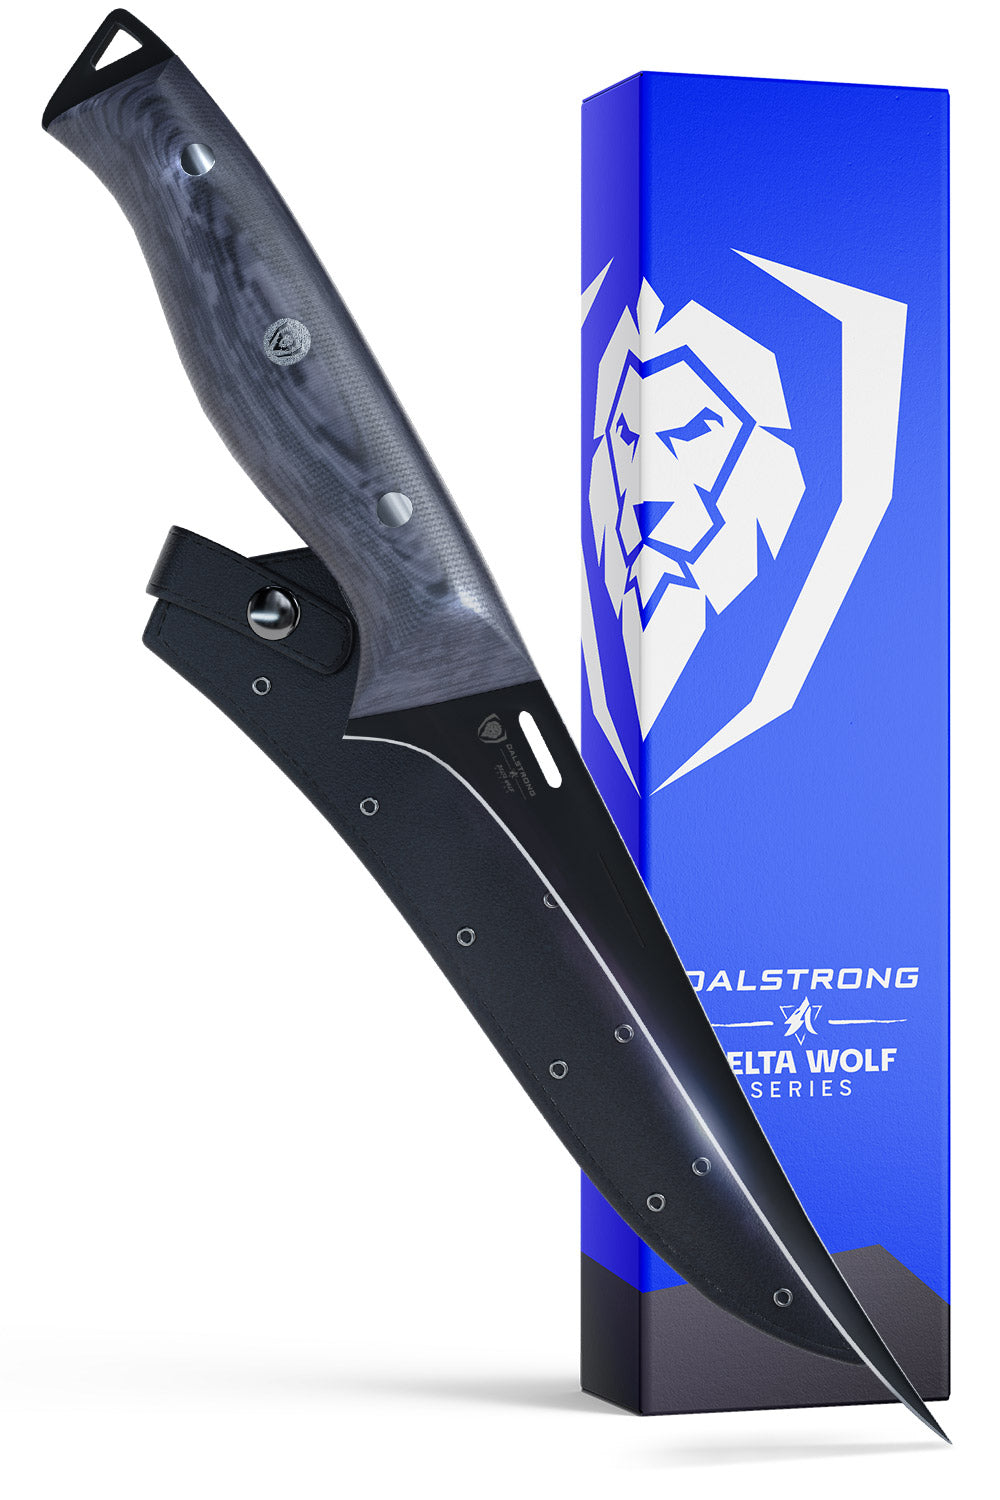 Dalstrong delta wolf series 6 inch fillet knife with black blade in front of it's premium packaging.